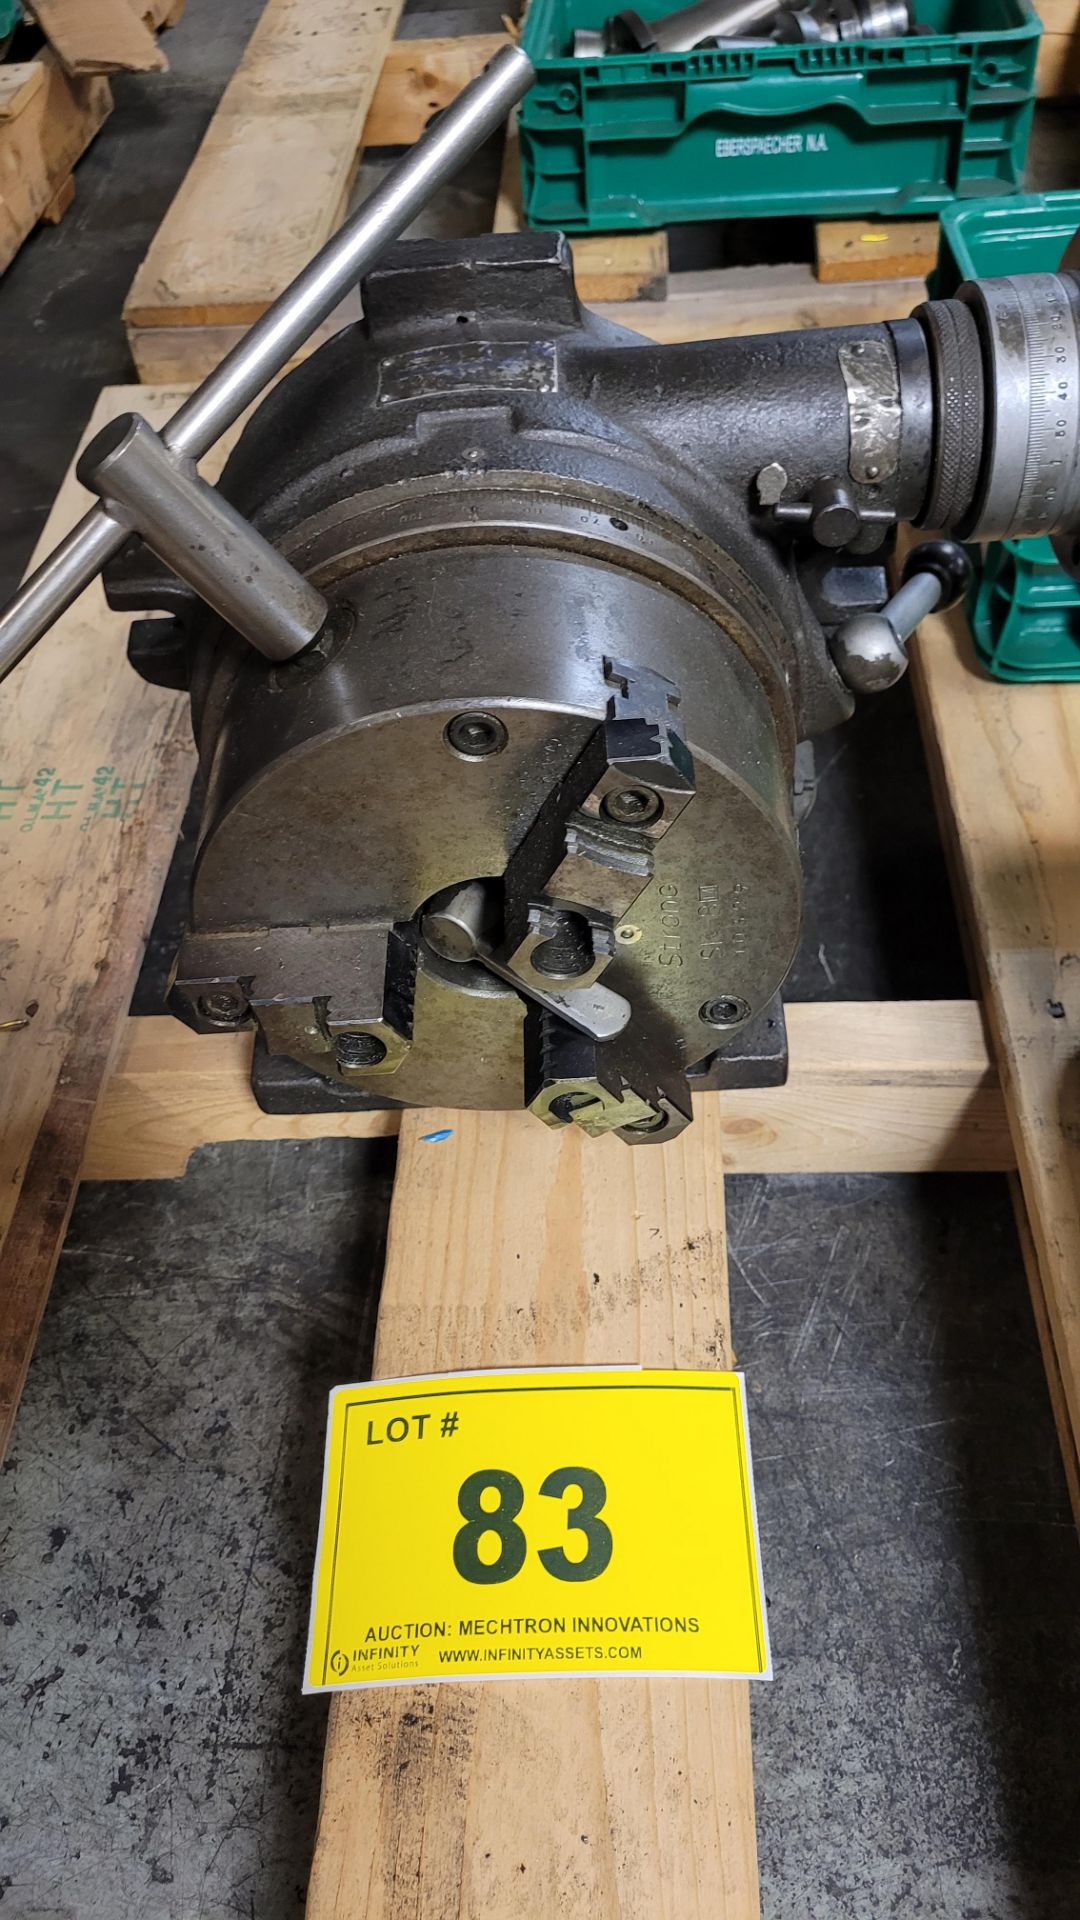 ROTARY TABLE W/ 3-JAW CHUCK, INDEXING FIXTURES, TAILSTOCKS, ETC. - Image 2 of 5